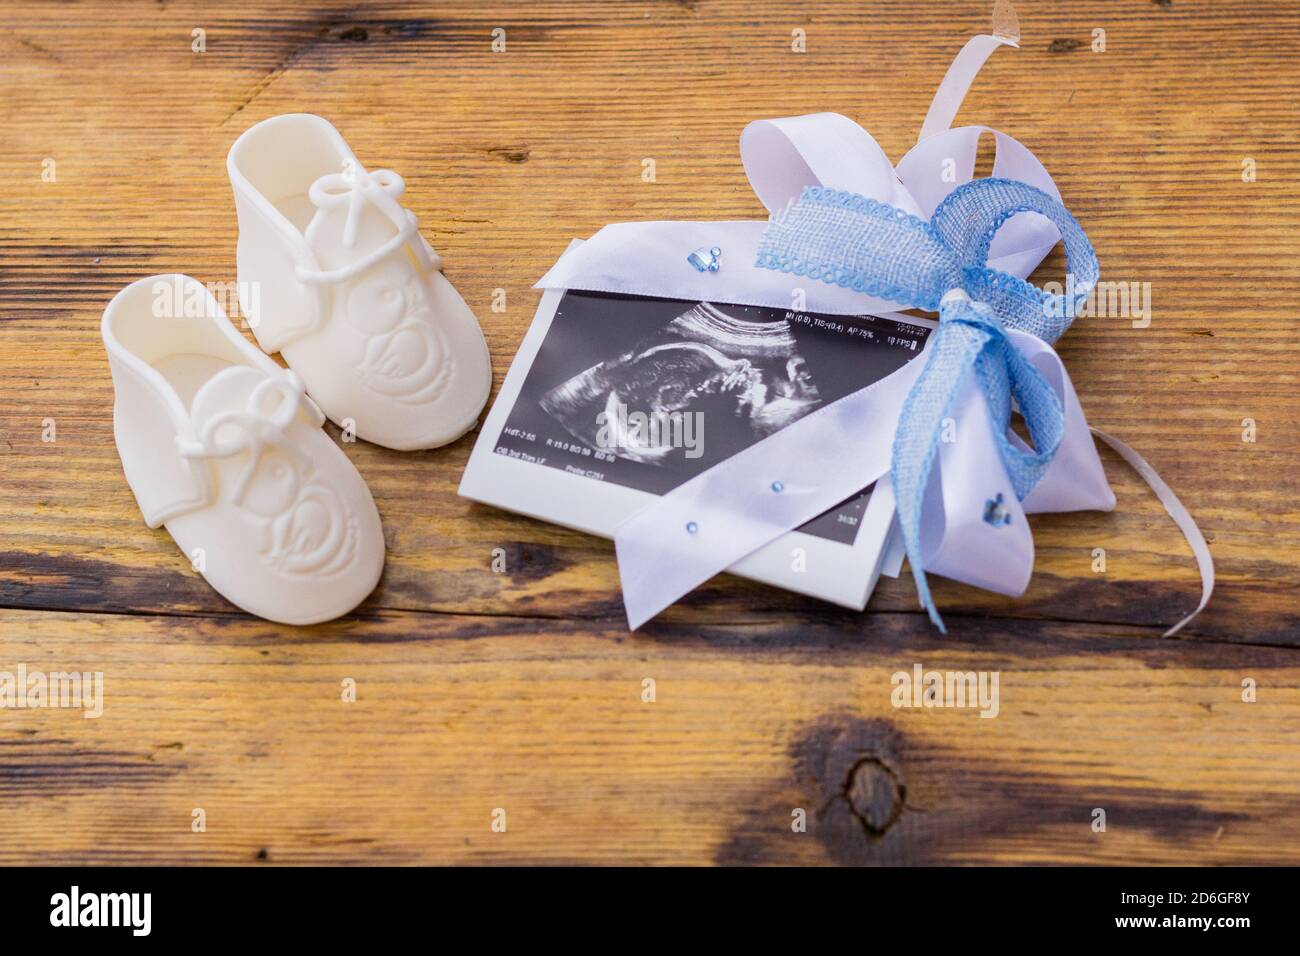 White Baby Boots with Blue Ribbon Bow around Ultrasound Image on Rustic Wooden Surface, Gender Reveal or Pregnancy Announcement Concept Stock Photo